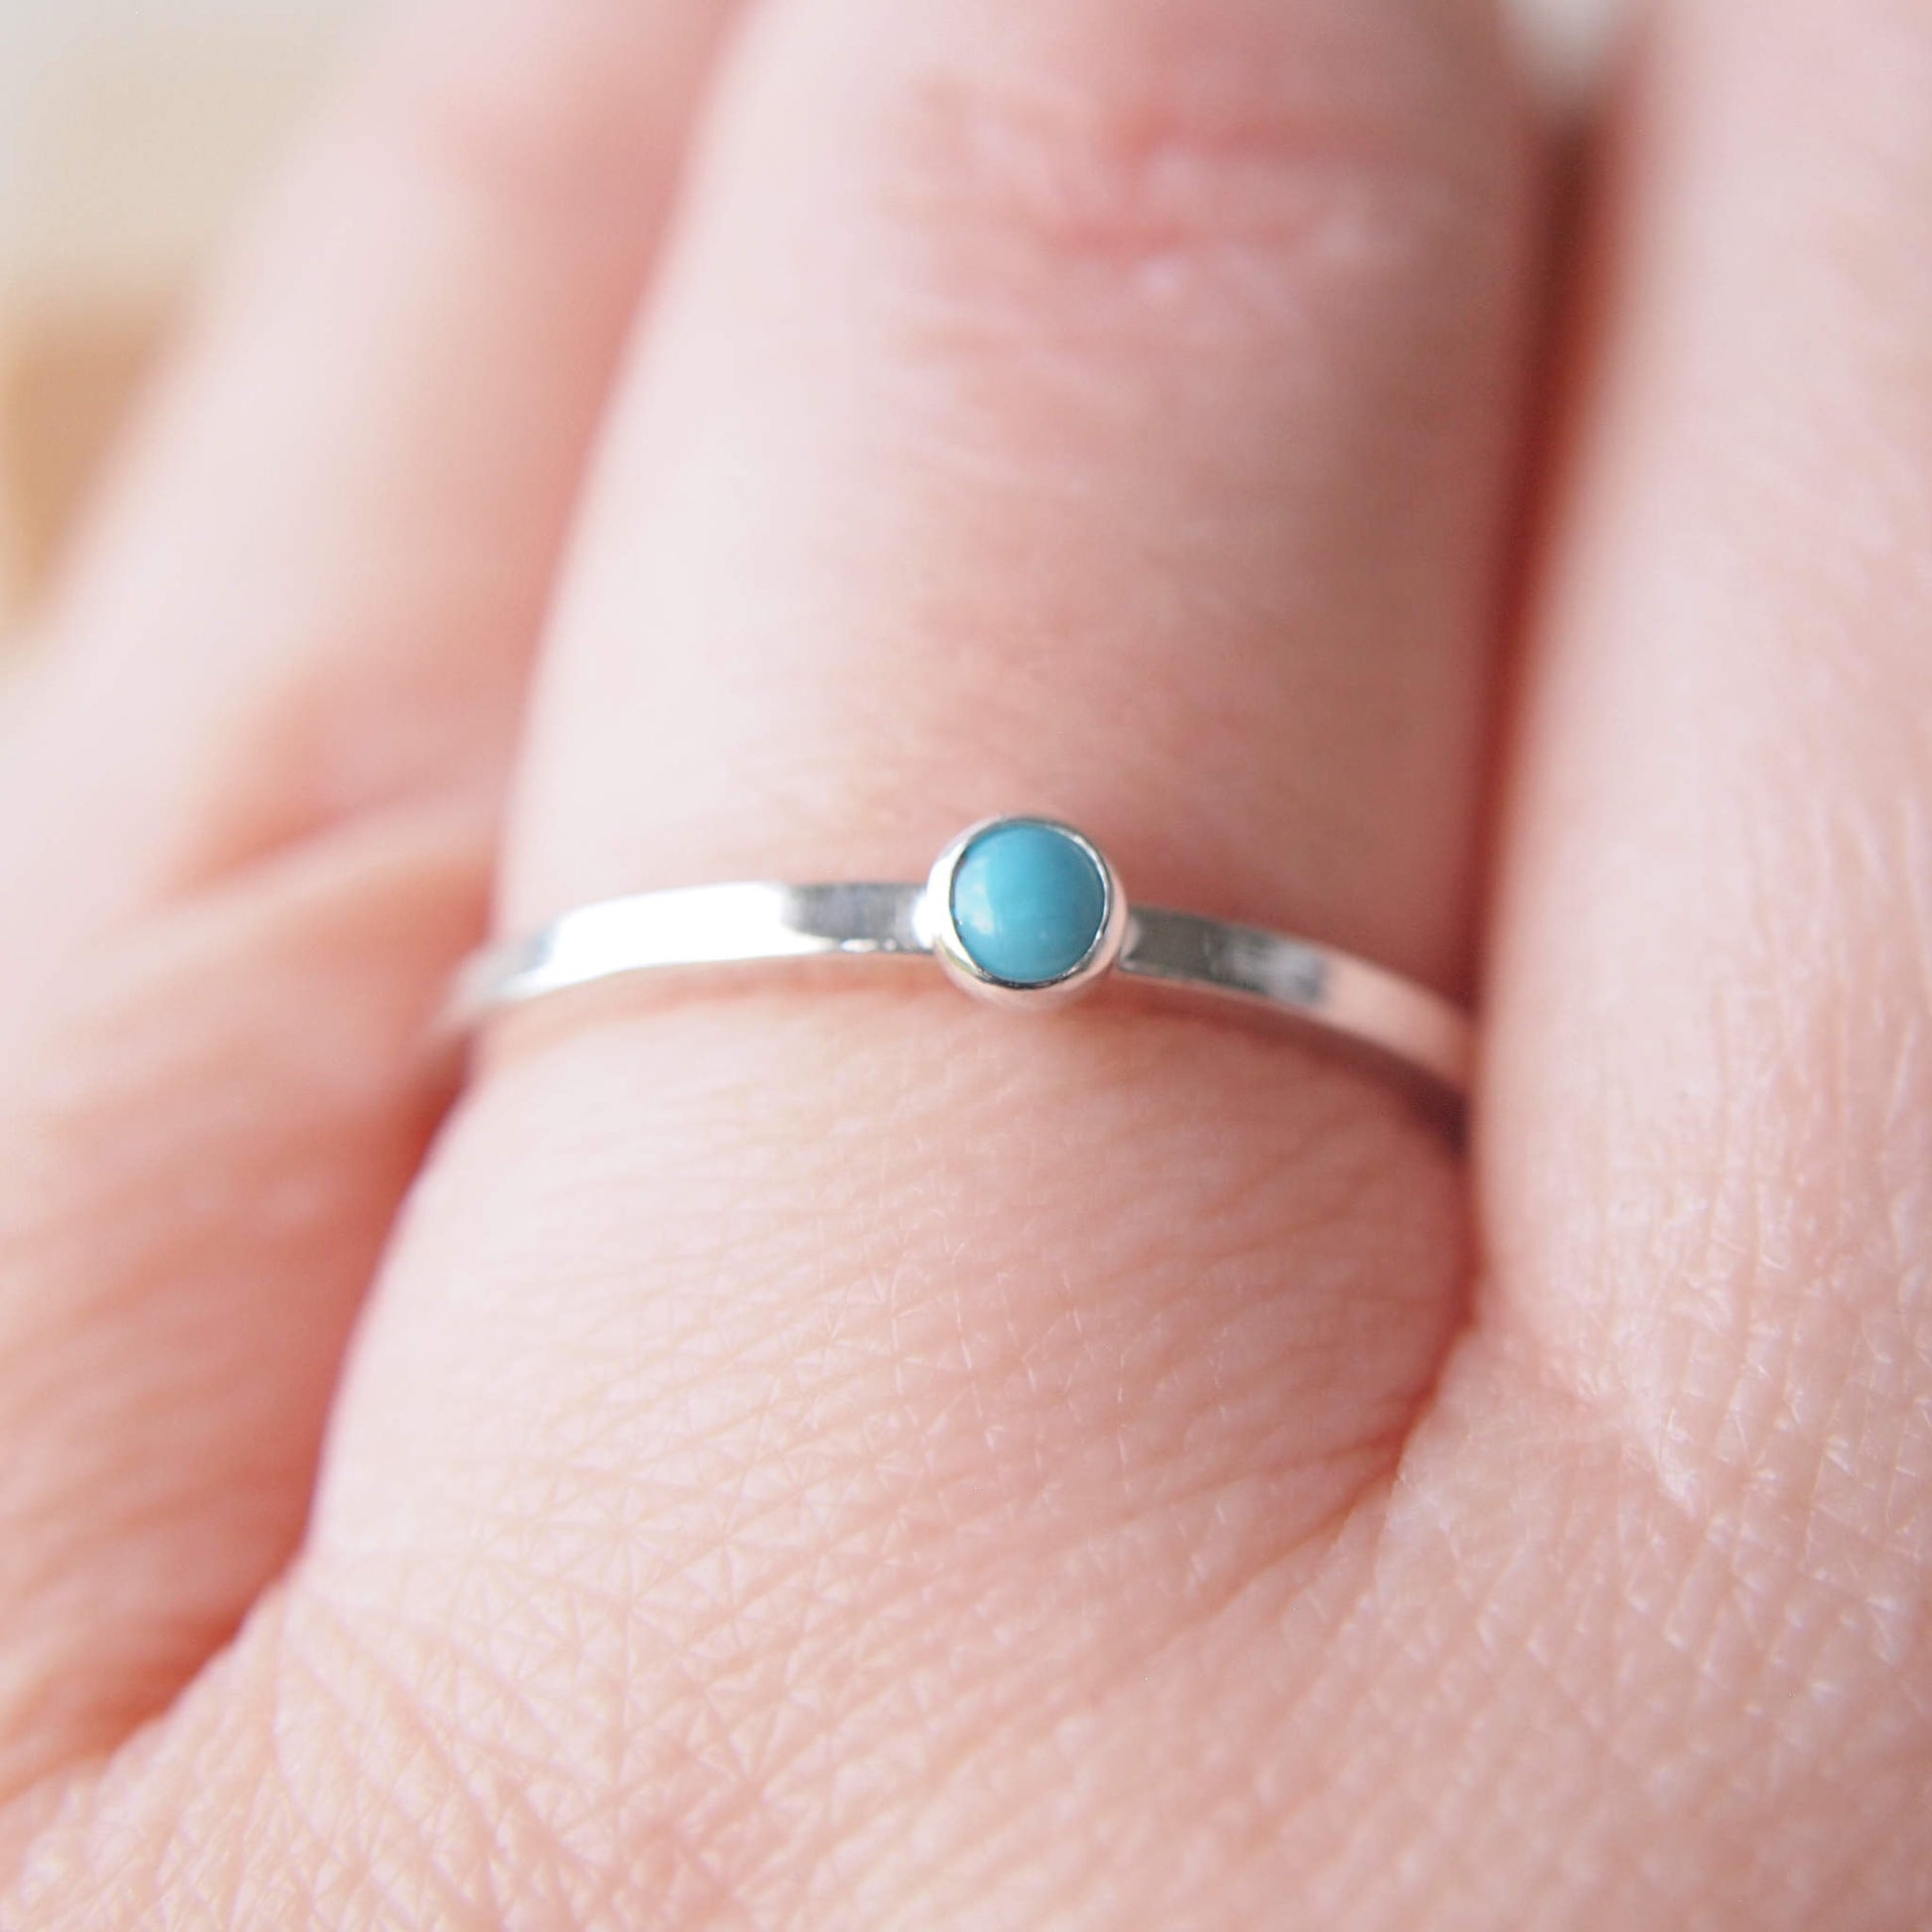 Turquoise and Silver square band ring with a 3mm gemstone pictured on a hand. Handmade by maram jewellery in Edinburgh UK